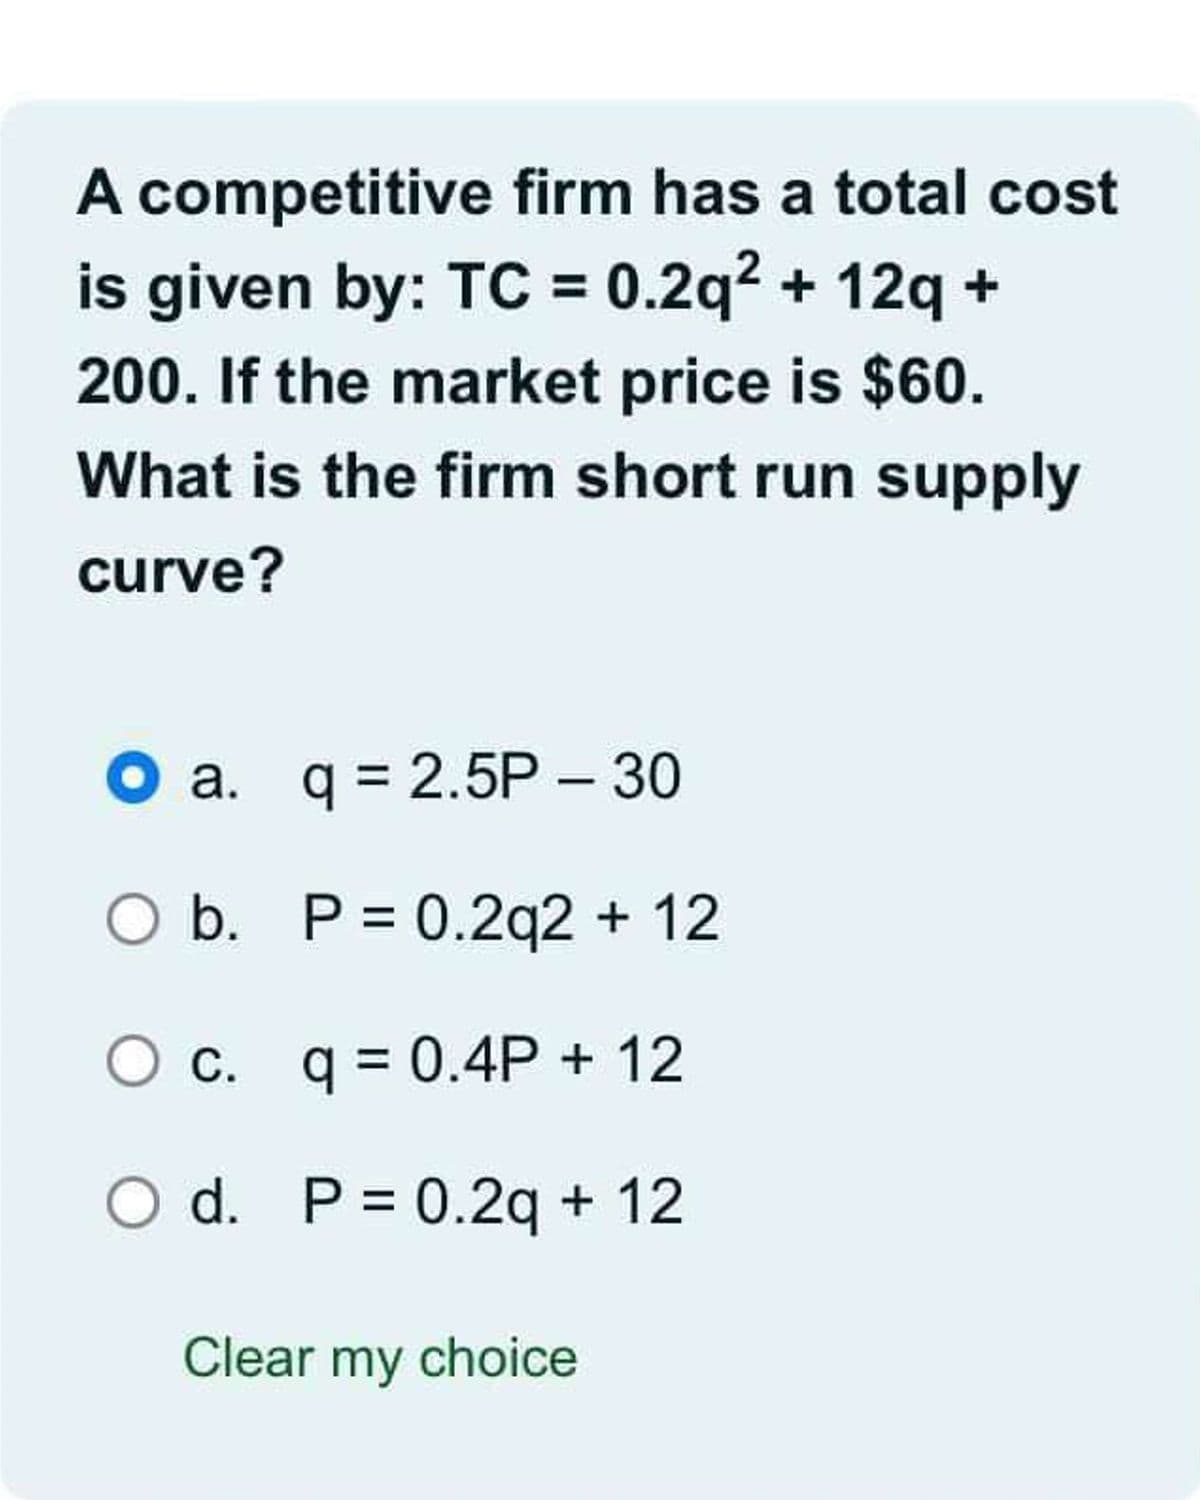 A competitive firm has a total cost
is given by: TC = 0.2q² + 12q +
200. If the market price is $60.
What is the firm short run supply
curve?
a.
q = 2.5P - 30
O b. P = 0.2q2 + 12
c. q = 0.4P + 12
O d. P = 0.2q + 12
Clear my choice